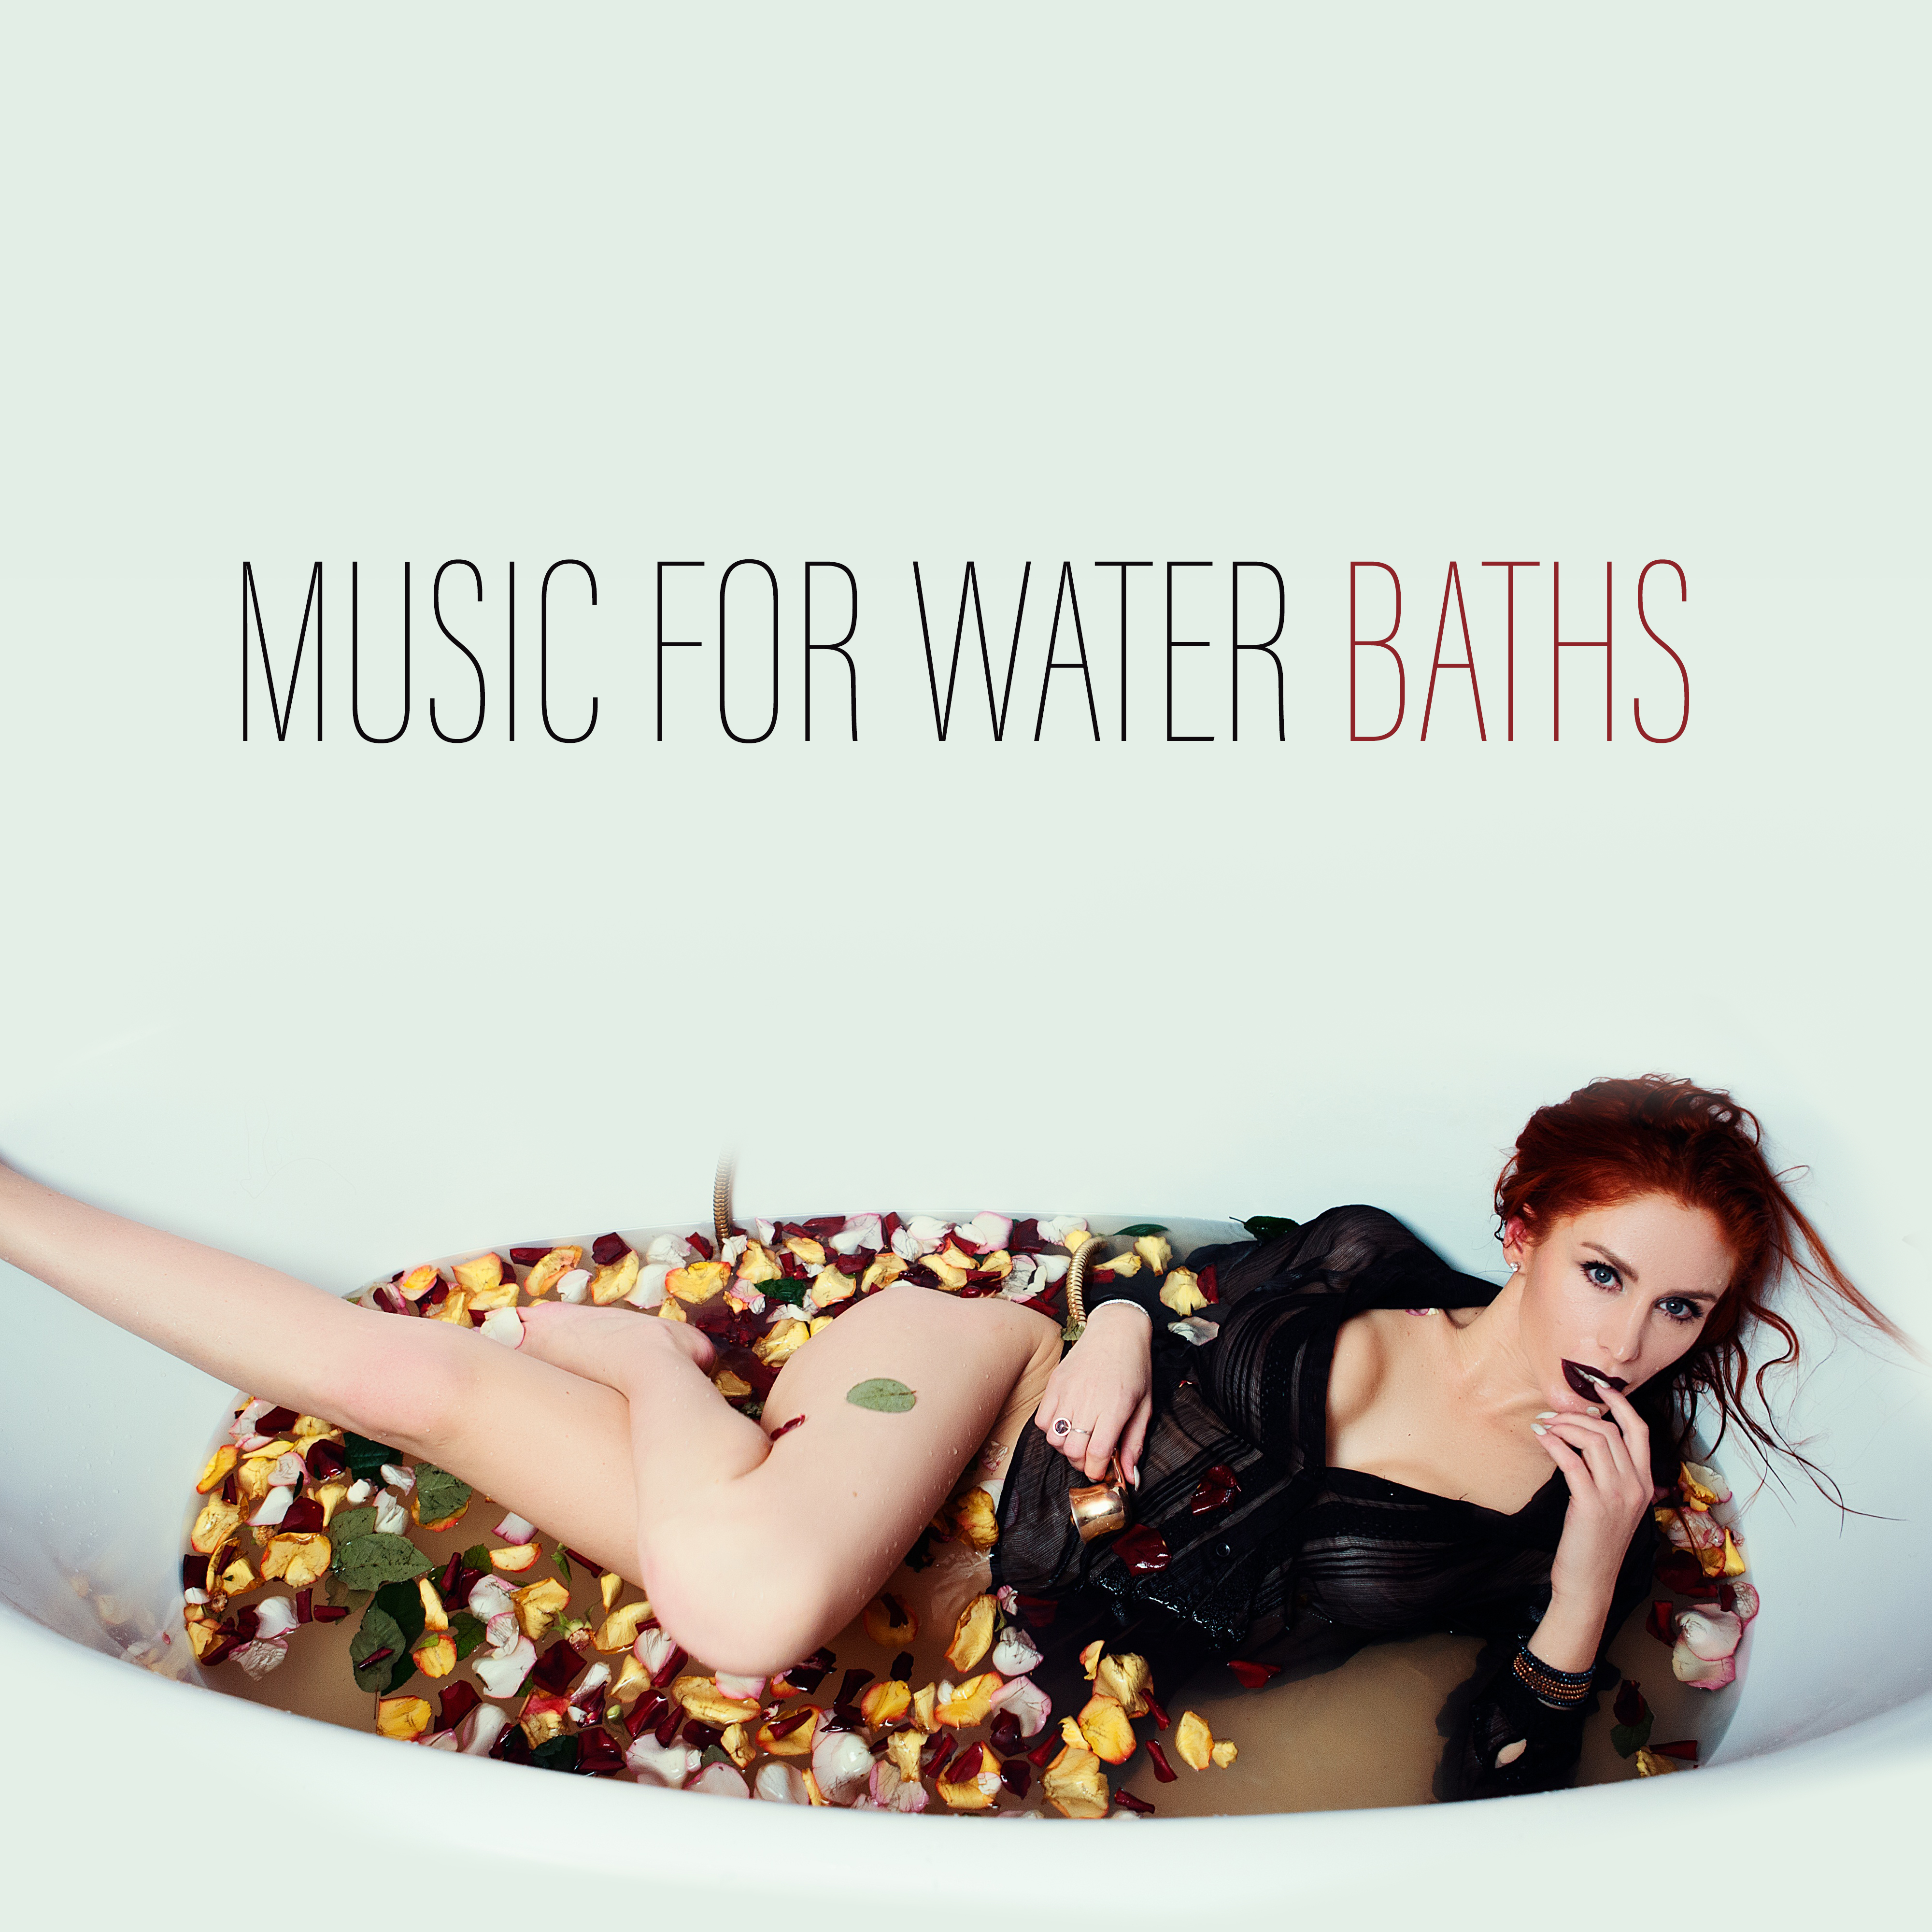 Music for Water Baths